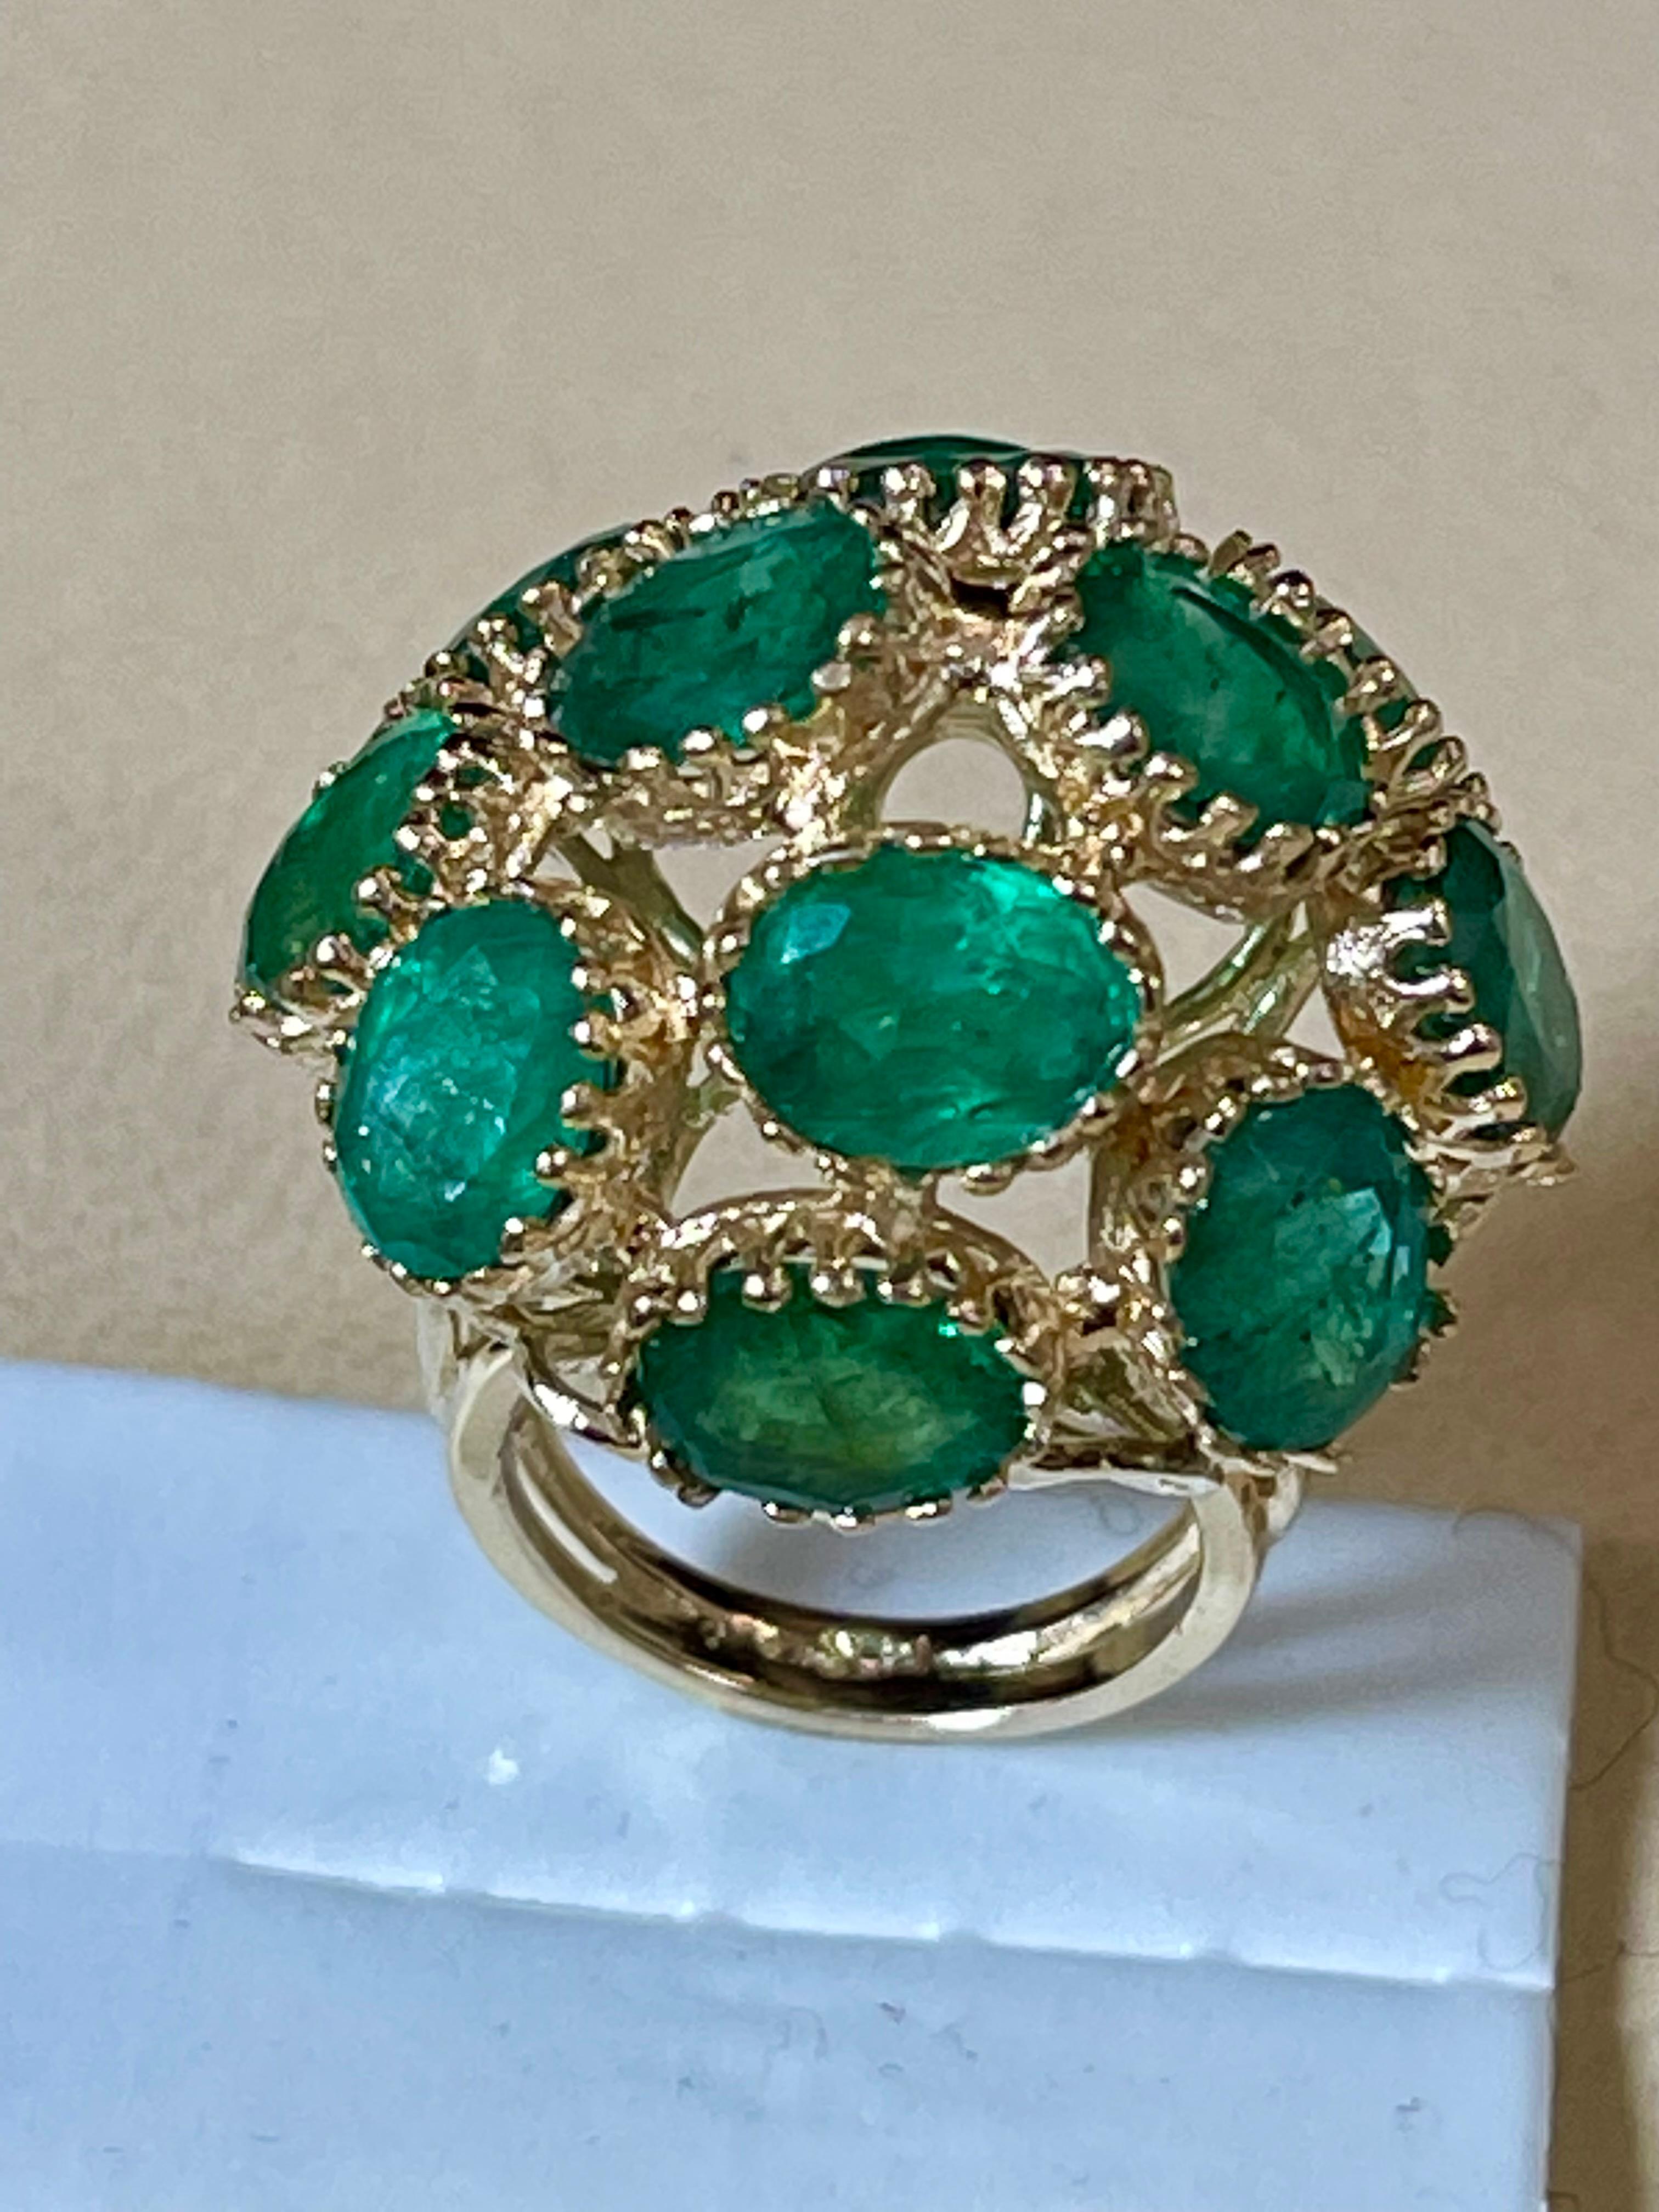 22Ct Natural Emerald, 12 Oval Stone Dome Shape Cocktail Ring 14 Kt Yellow Gold For Sale 5